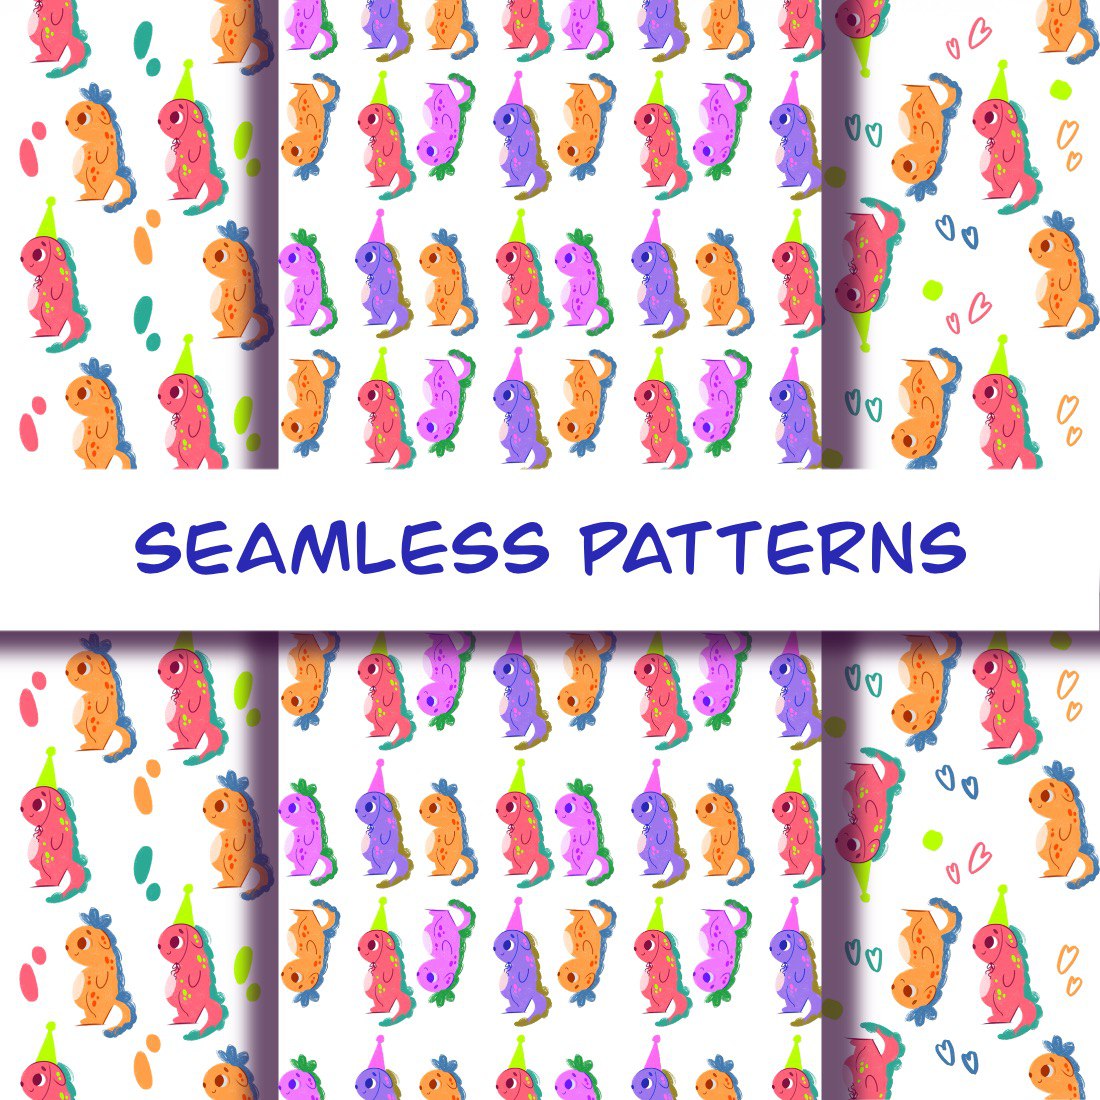 Seamless Patterns: Dinosaurs cover image.